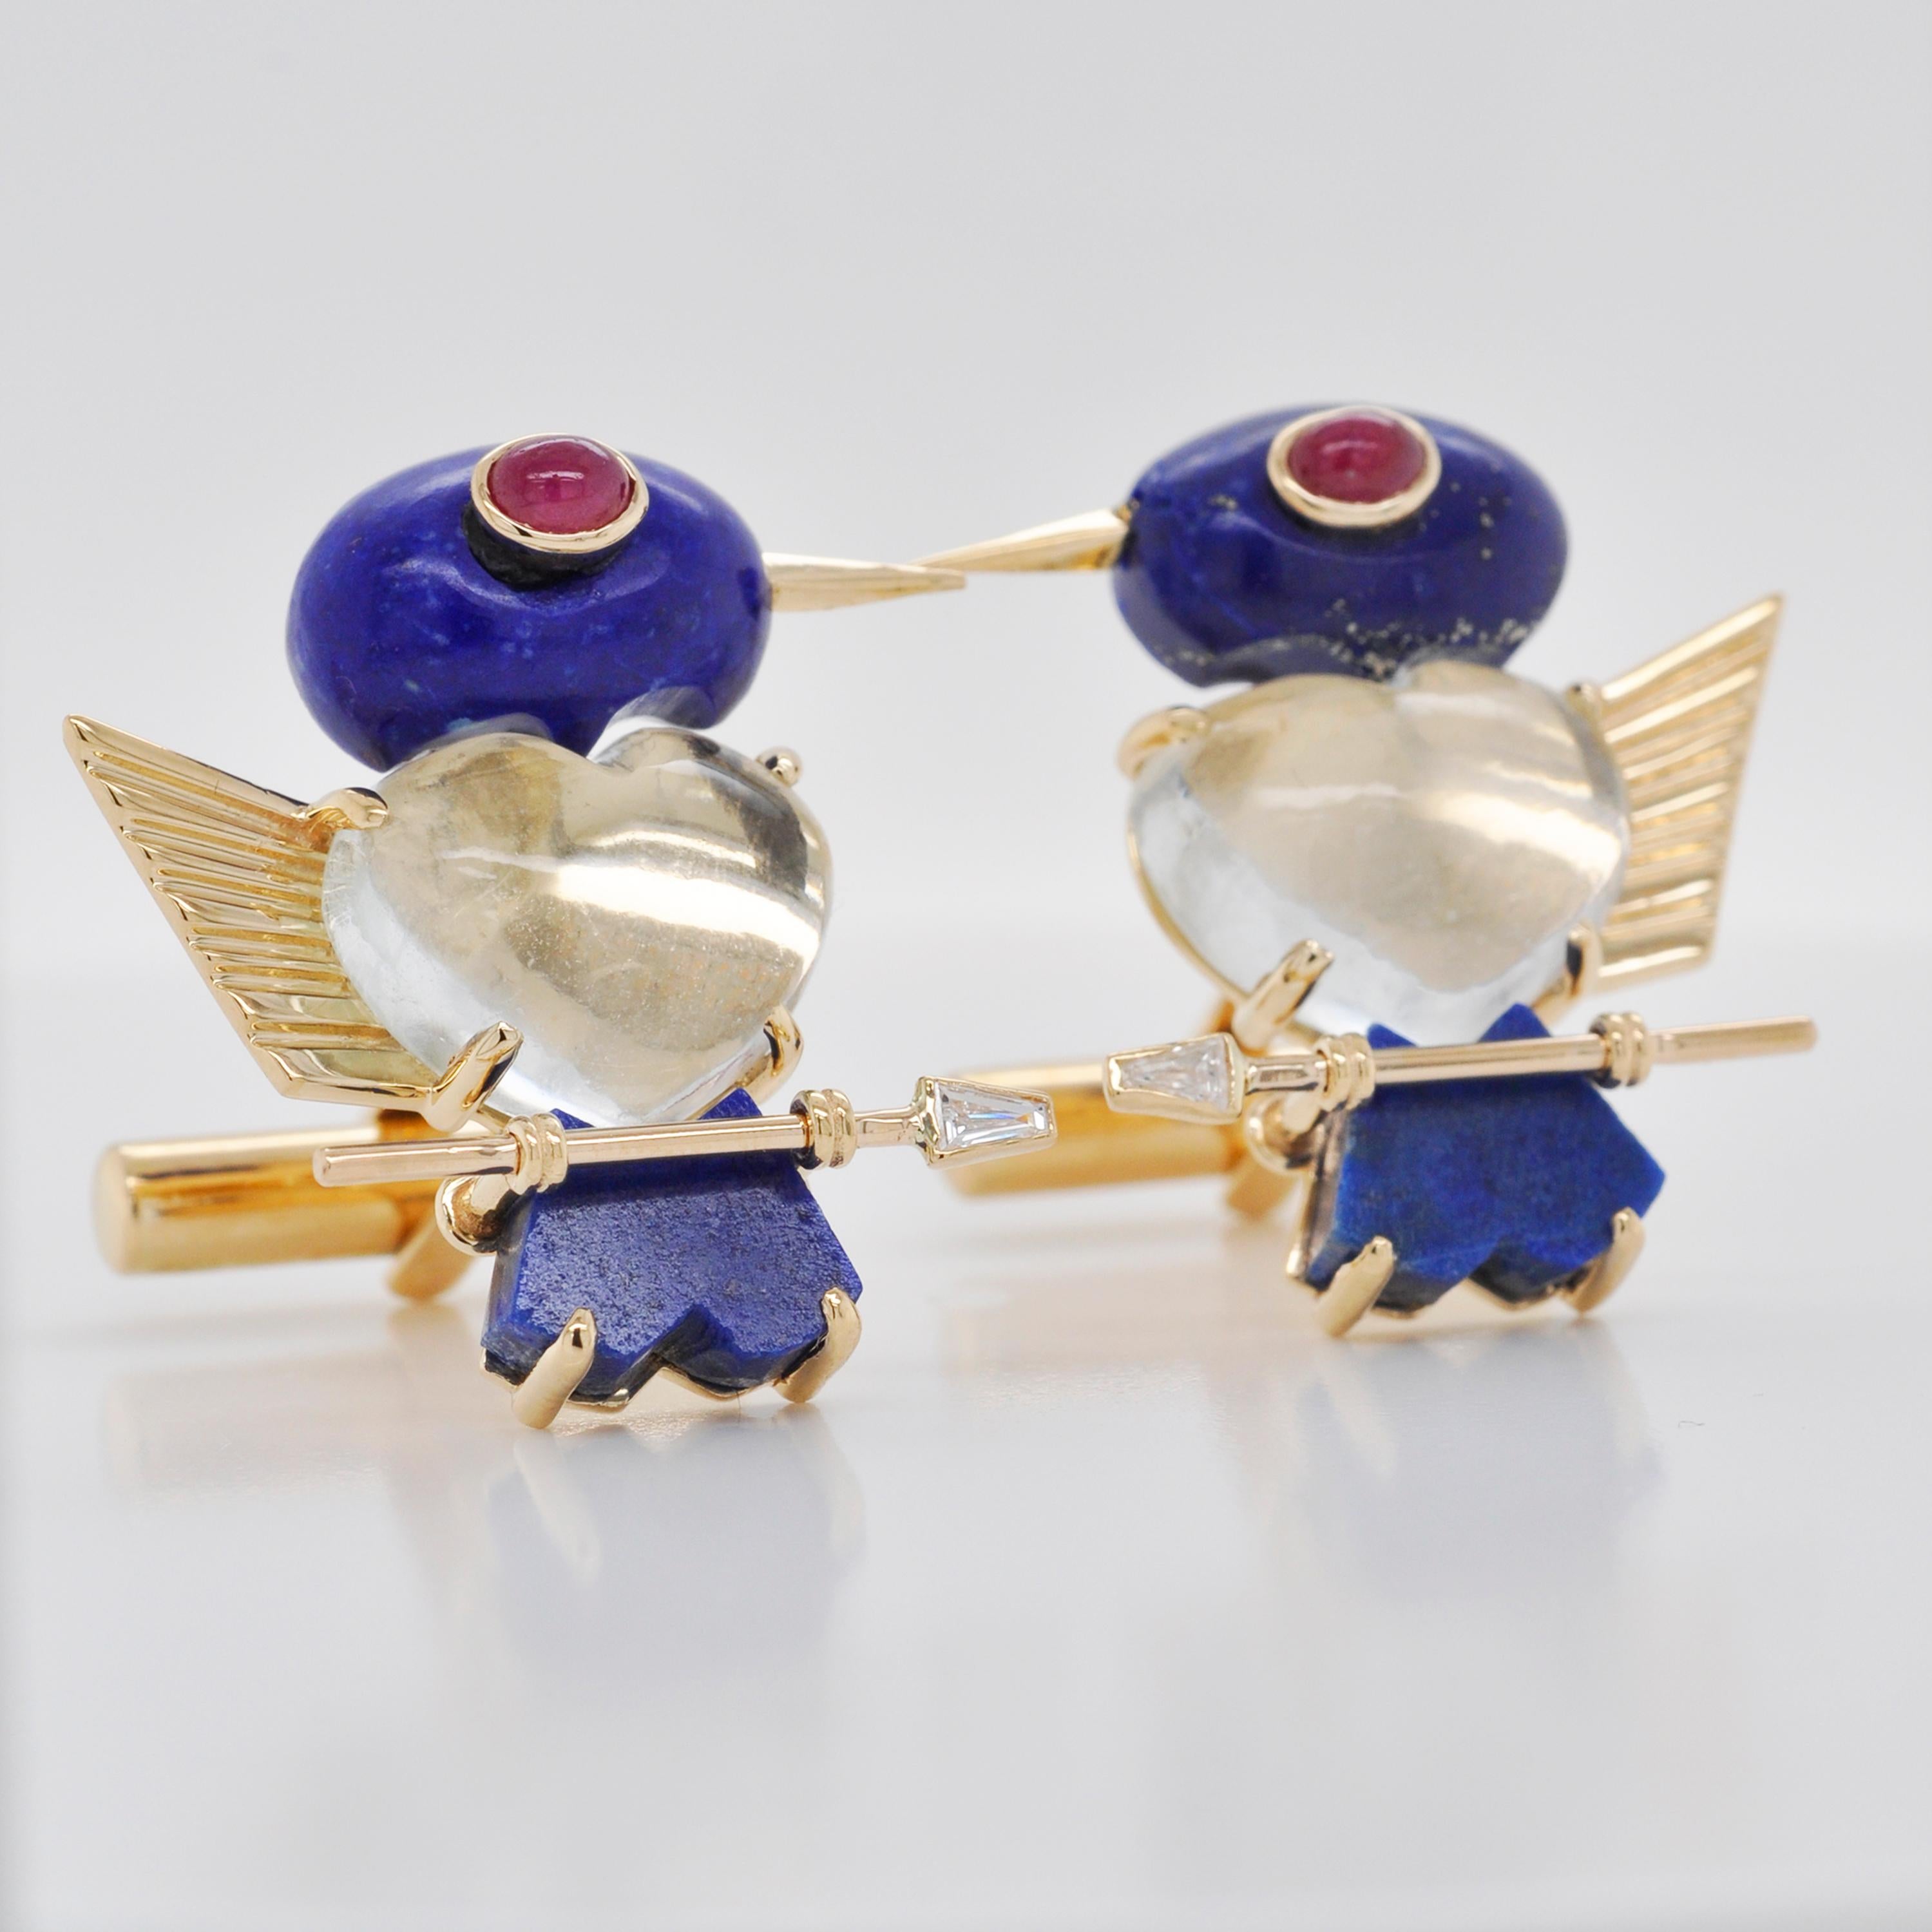 18 karat gold lapis lazuli moonstone ruby diamond baguette bird cufflinks

These one of a kind 18 karat gold Bird cufflinks are extremely unique. In the head part of the bird, Lapis Lazuli cabochons are drilled to set the ruby cabochon in gold for